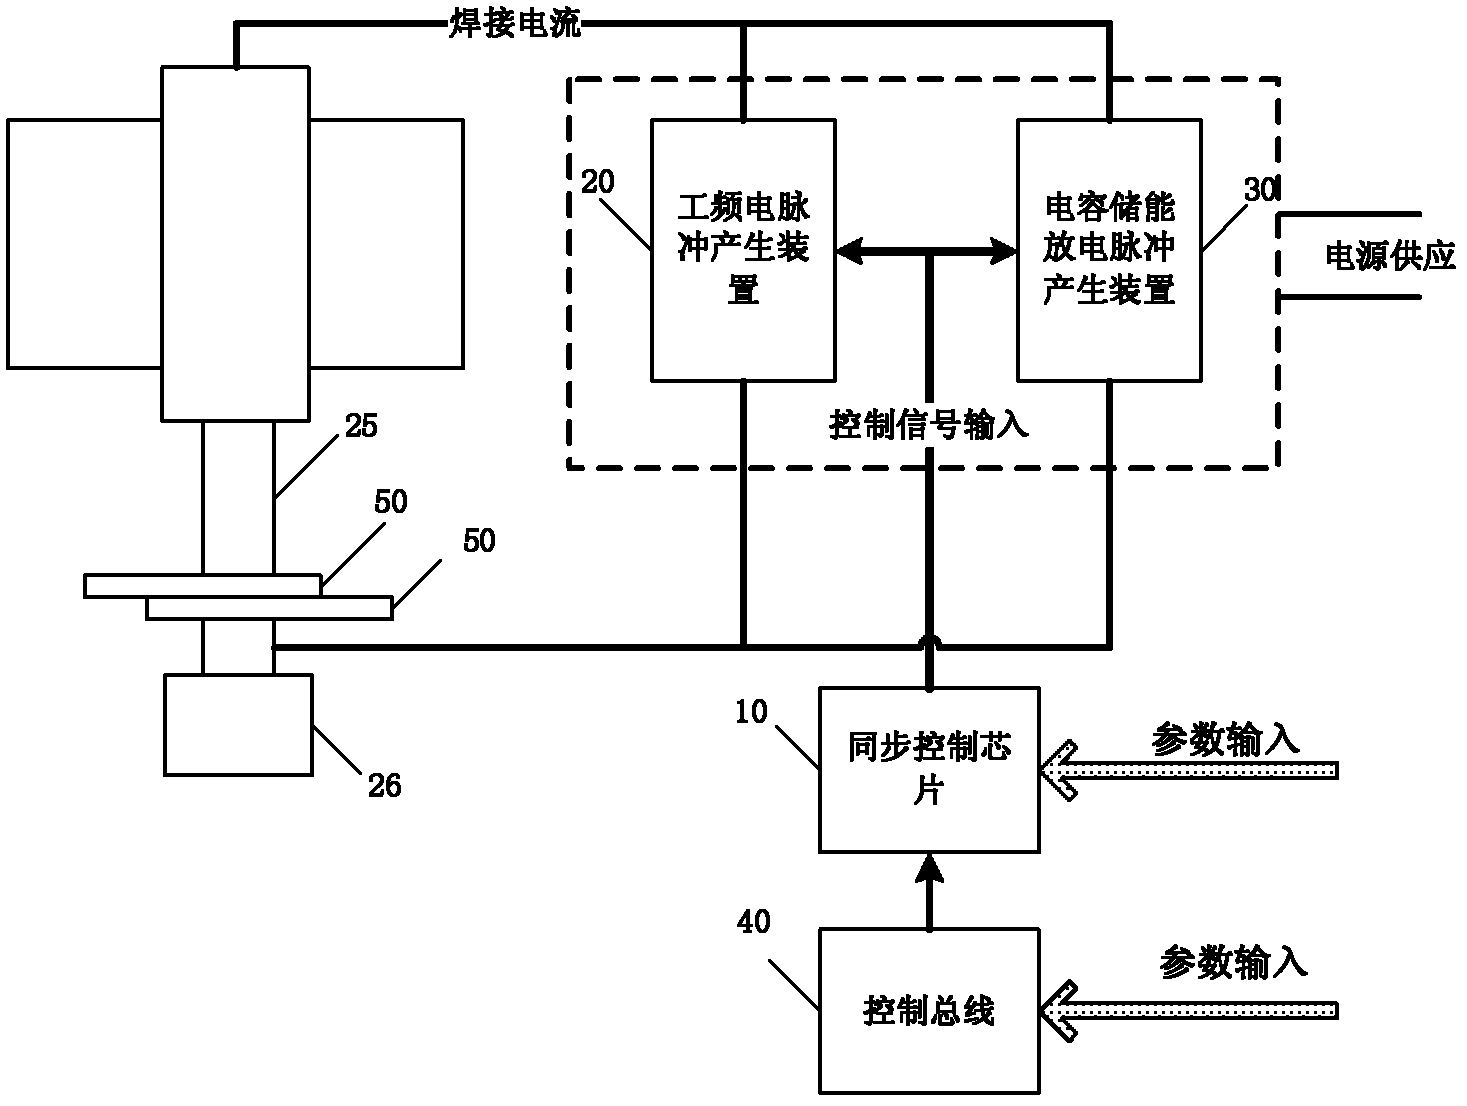 Composite pulsation spot welding process and system